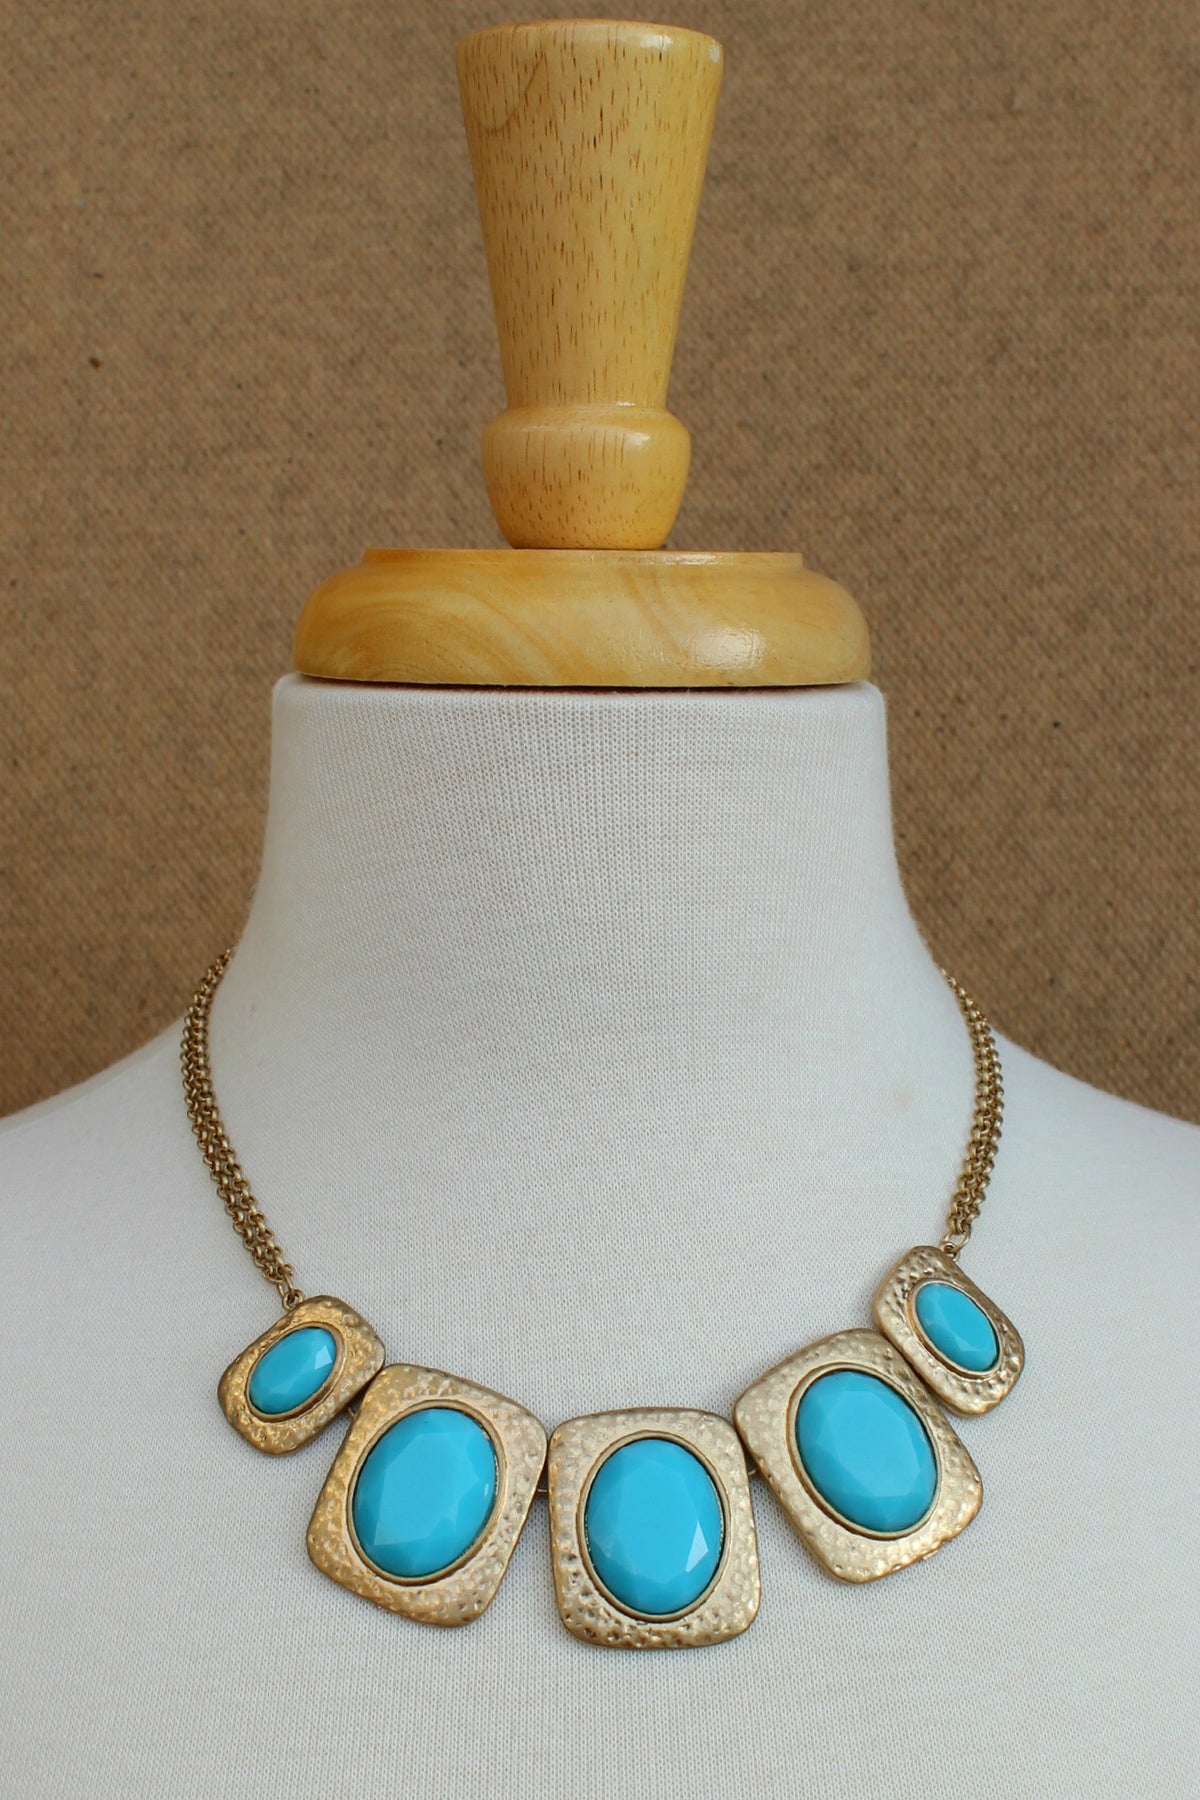 Inlaid Oval Necklace - Baby Blue